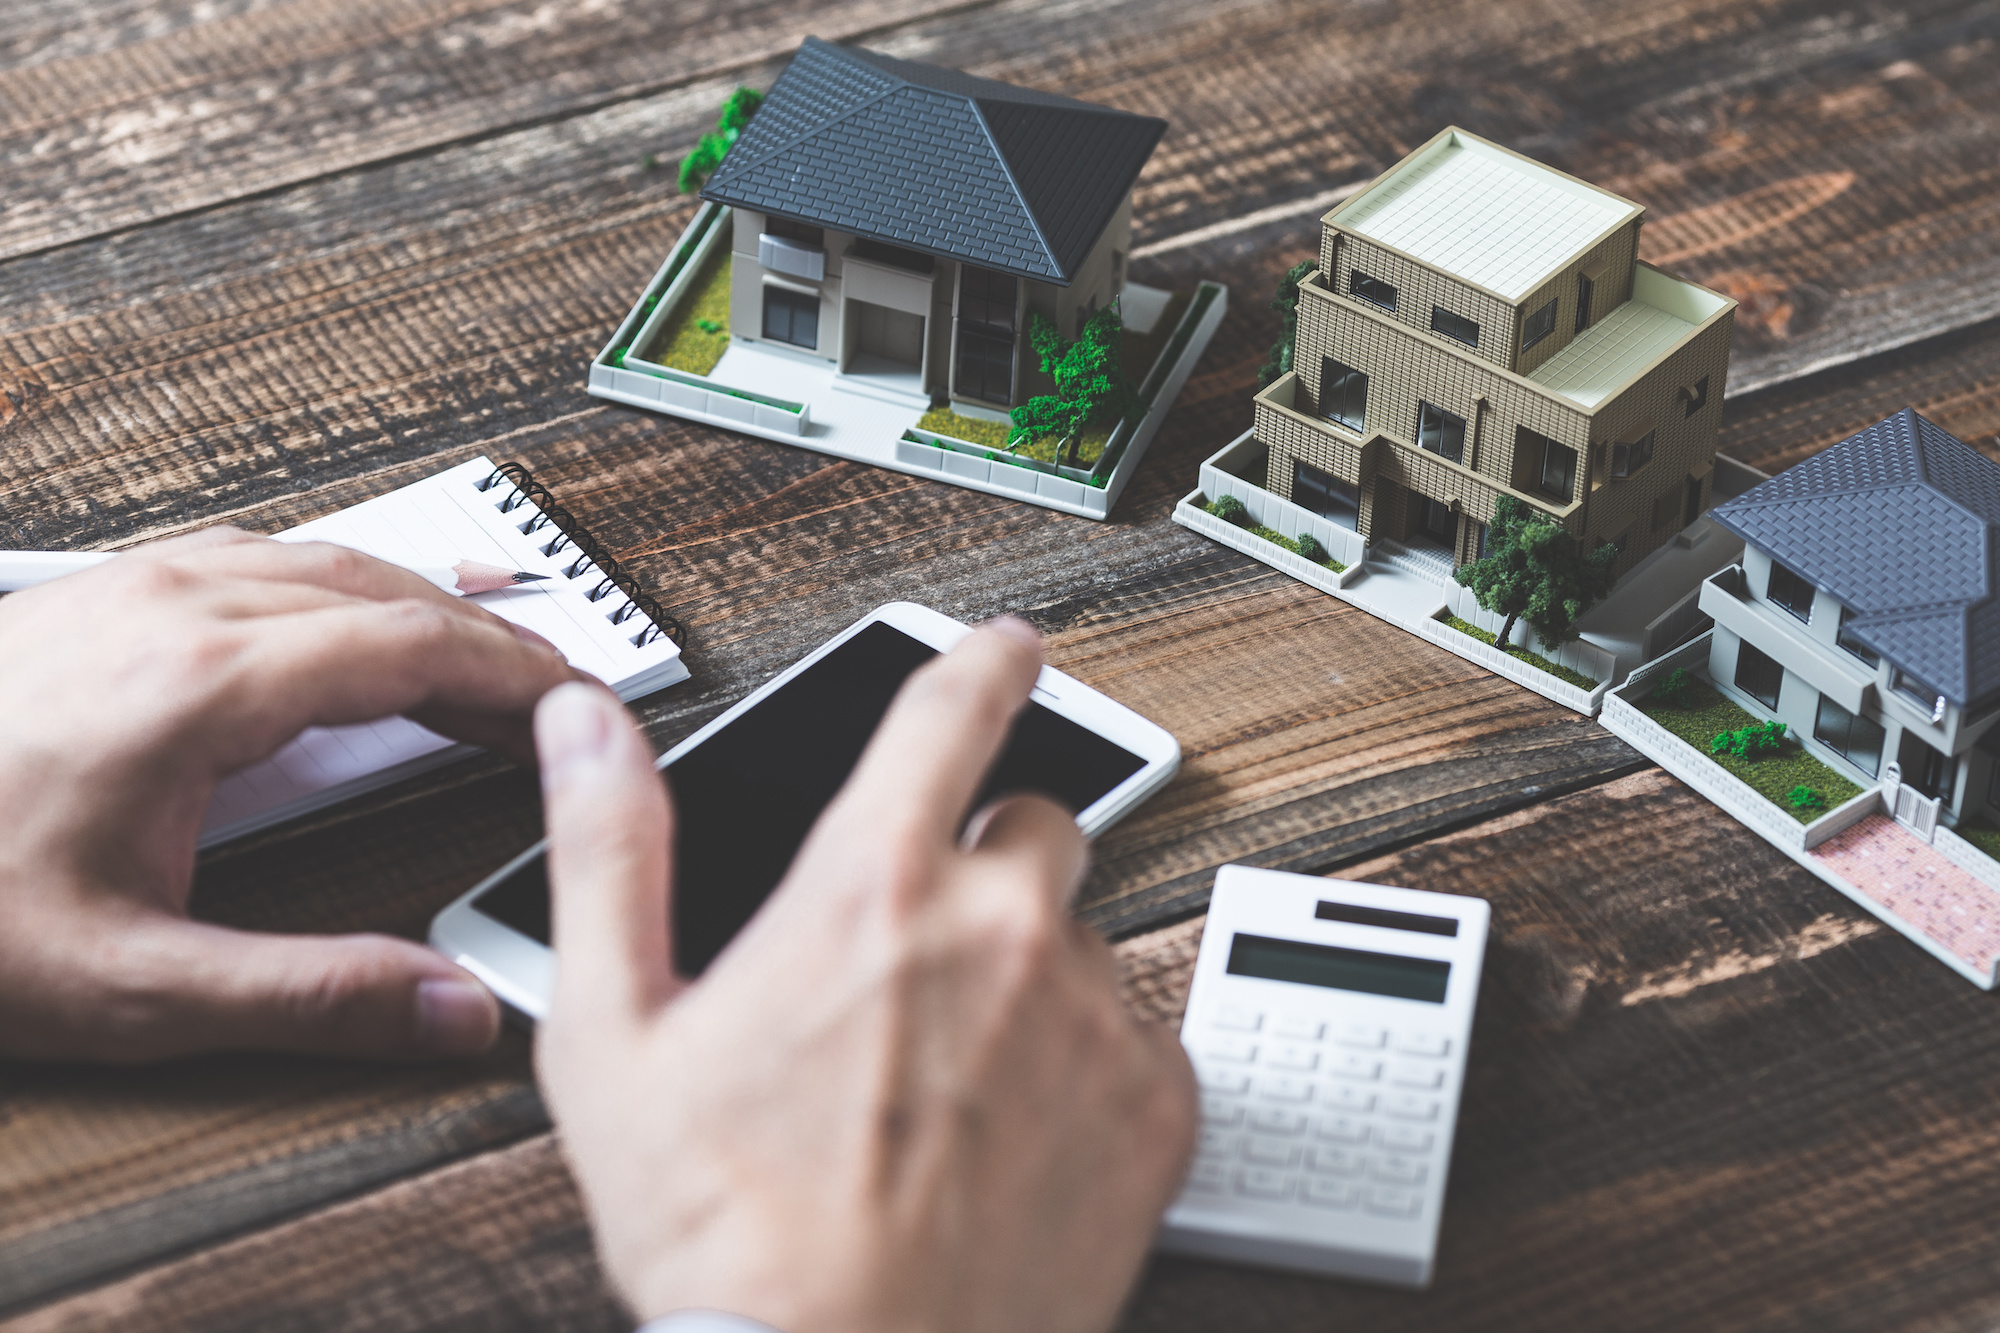 Three small miniature house models, a smartphone, calculator, notepad and person's hand with a pen.